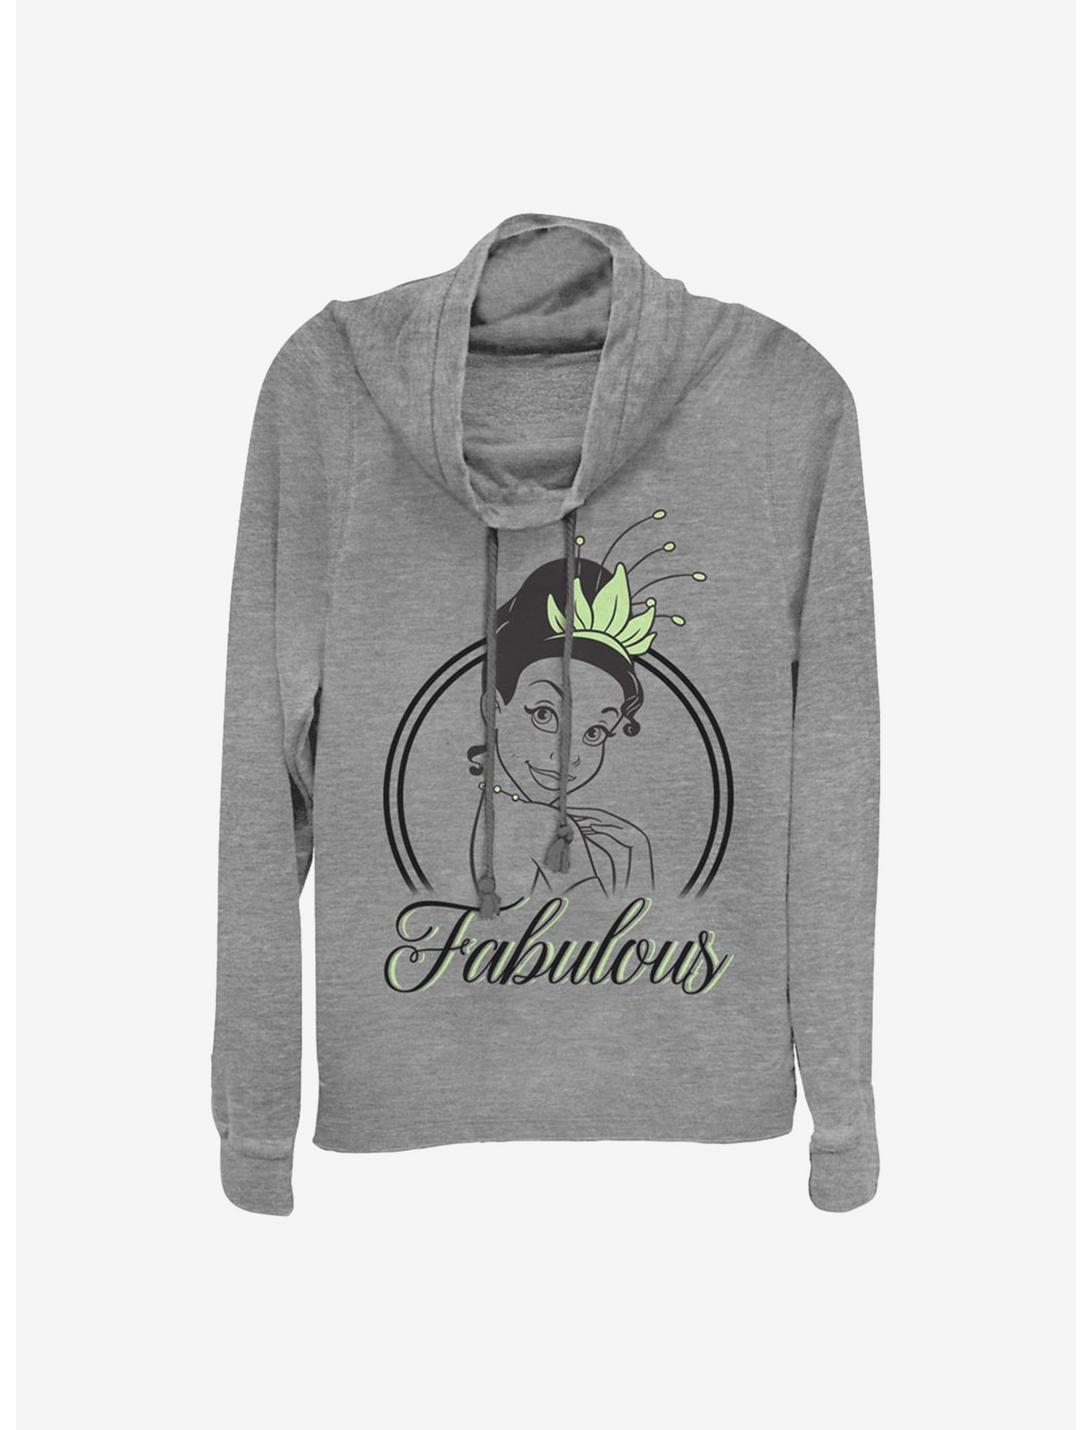 Disney The Princess And The Frog Fabulous Tiana Cowlneck Long-Sleeve Girls Top, GRAY HTR, hi-res